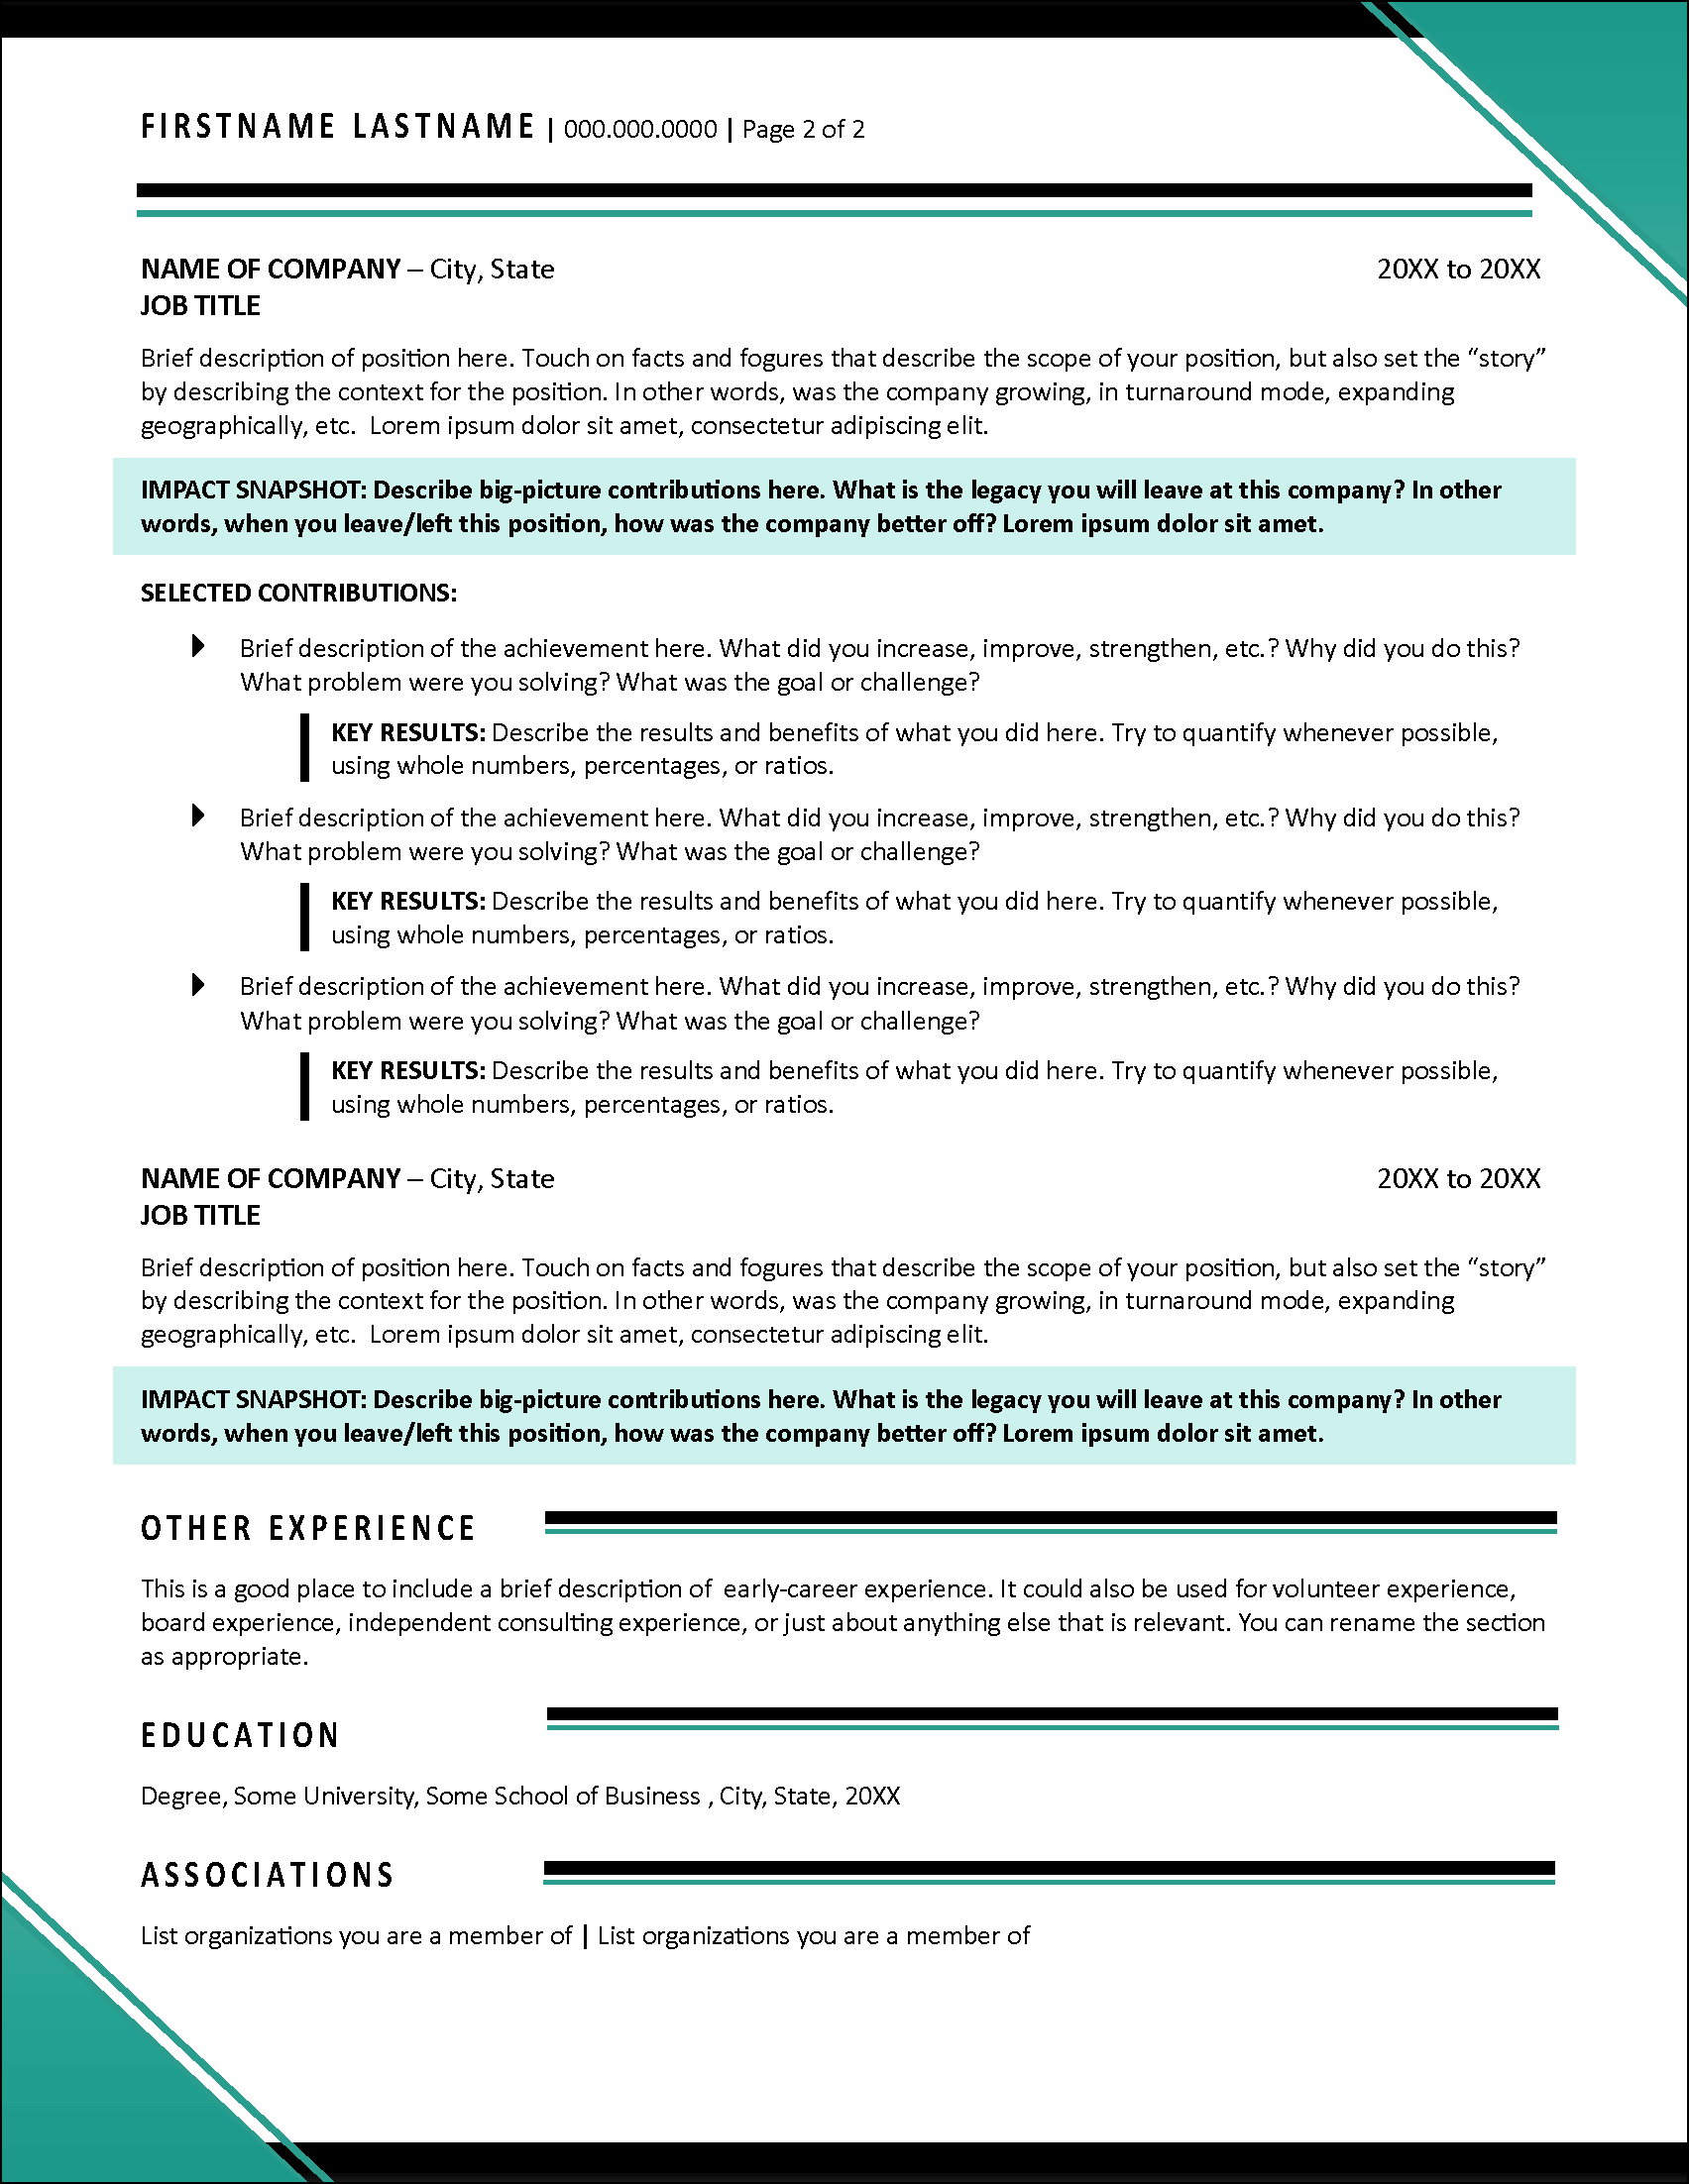 Dynamic Resume Format Page 2